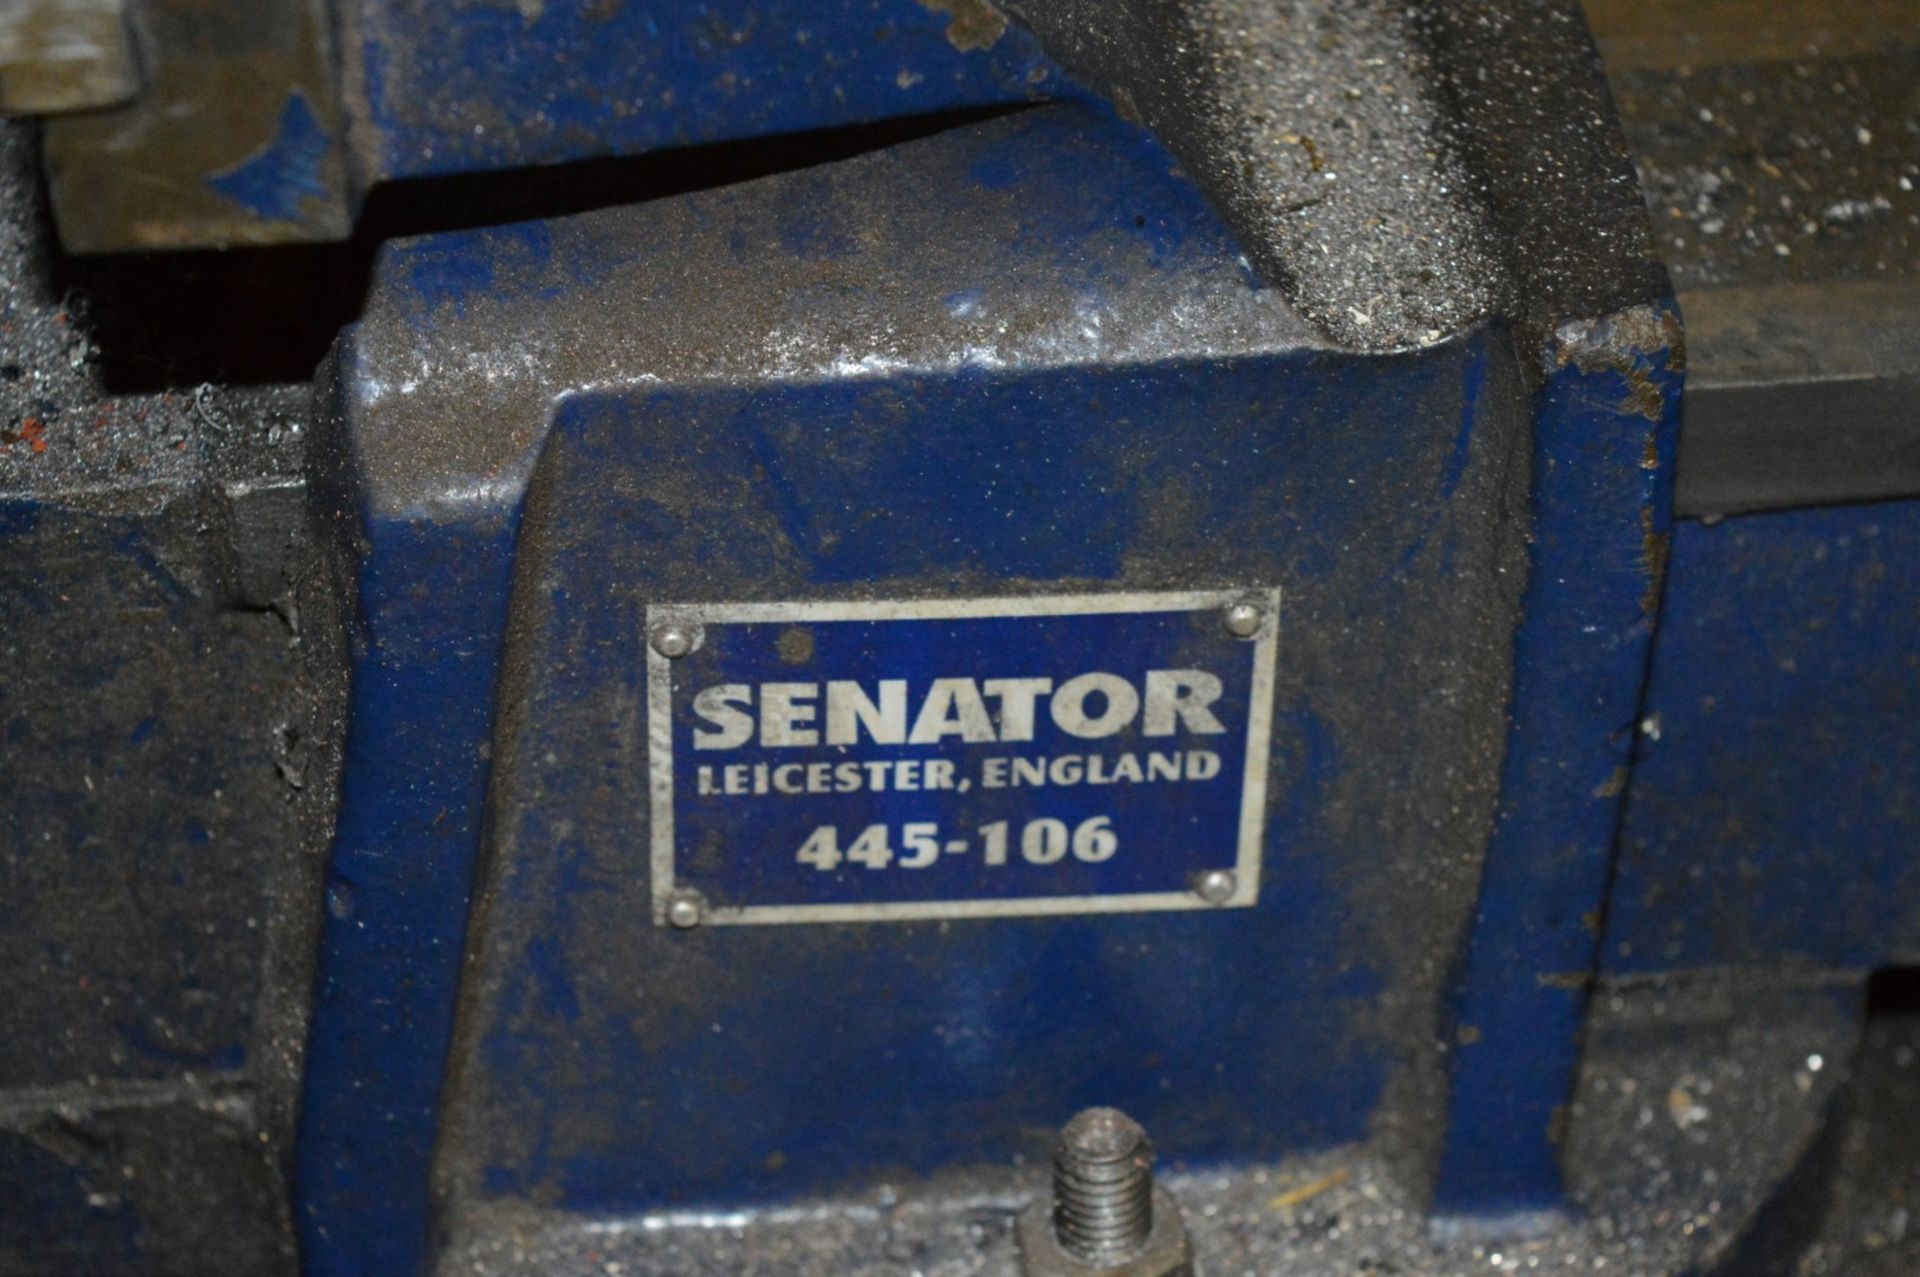 1 x Senator 445-106 Bench Mounted Engineers Vice - CL202 - Ref EN557 - Location: Worcester WR14 - Image 2 of 3